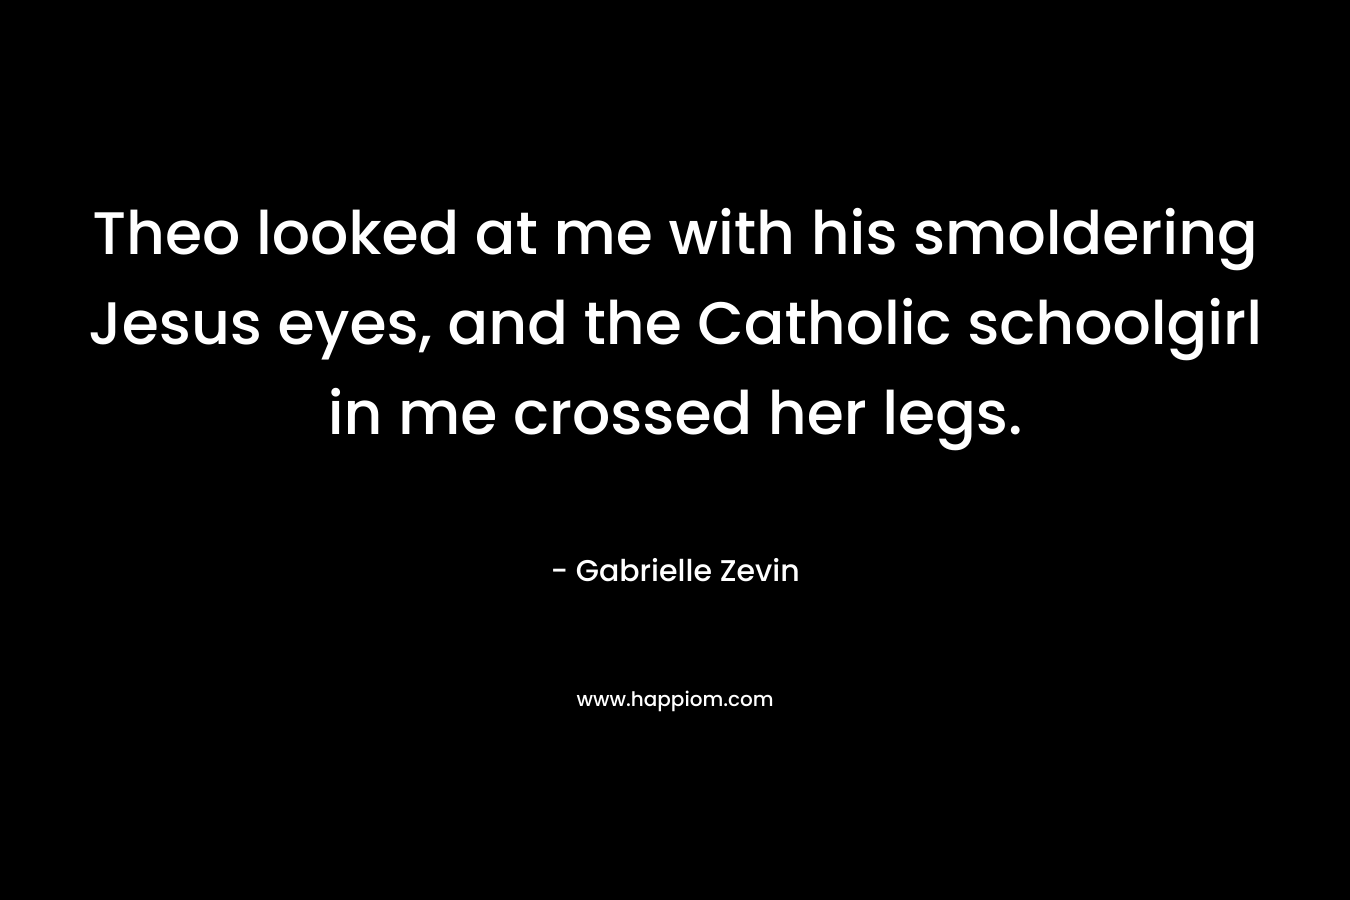 Theo looked at me with his smoldering Jesus eyes, and the Catholic schoolgirl in me crossed her legs. – Gabrielle Zevin